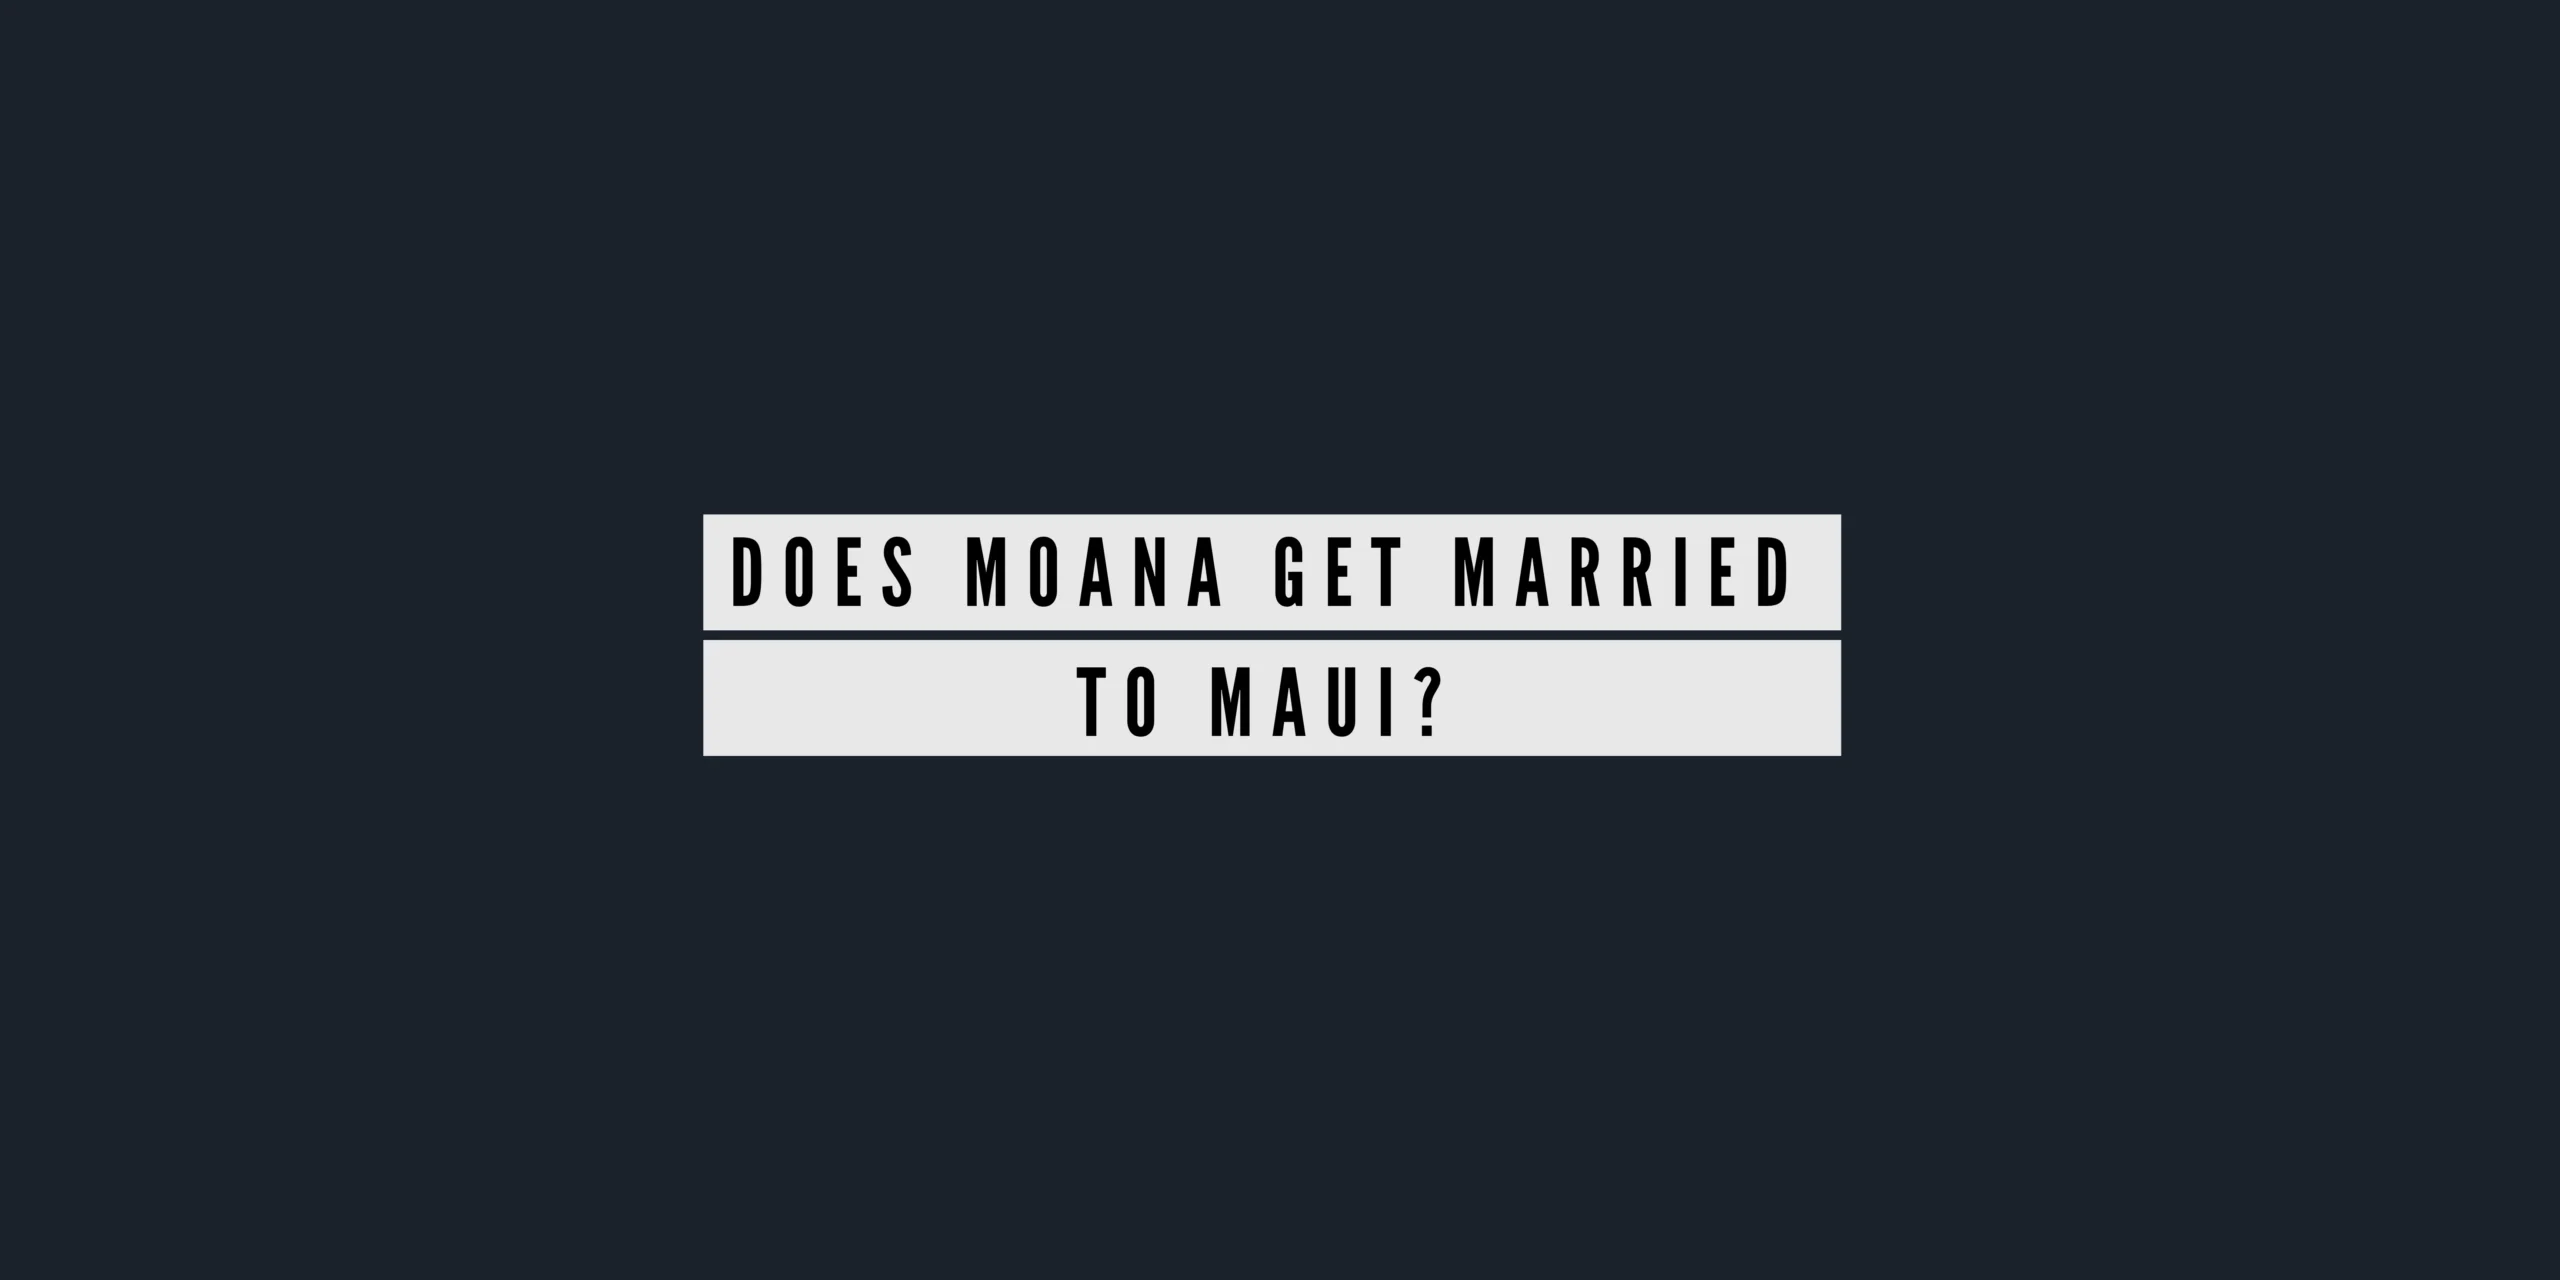 Does Moana Get Married to Maui in the Disney Film